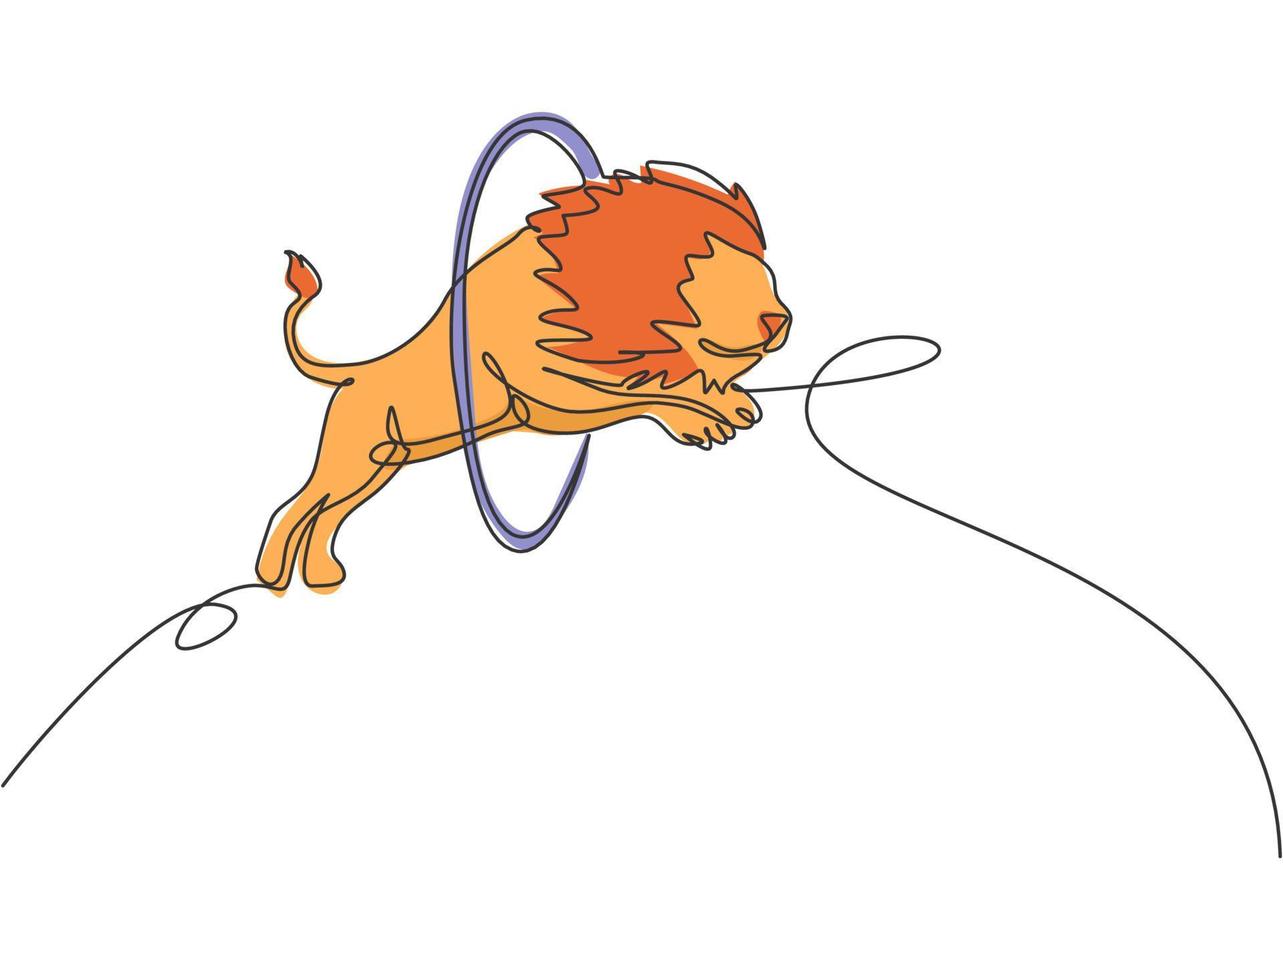 Single one line drawing of a lion jumping into the circle at a circus show. The trainer is watching carefully. Successful circus show concept. Continuous line draw design graphic vector illustration.